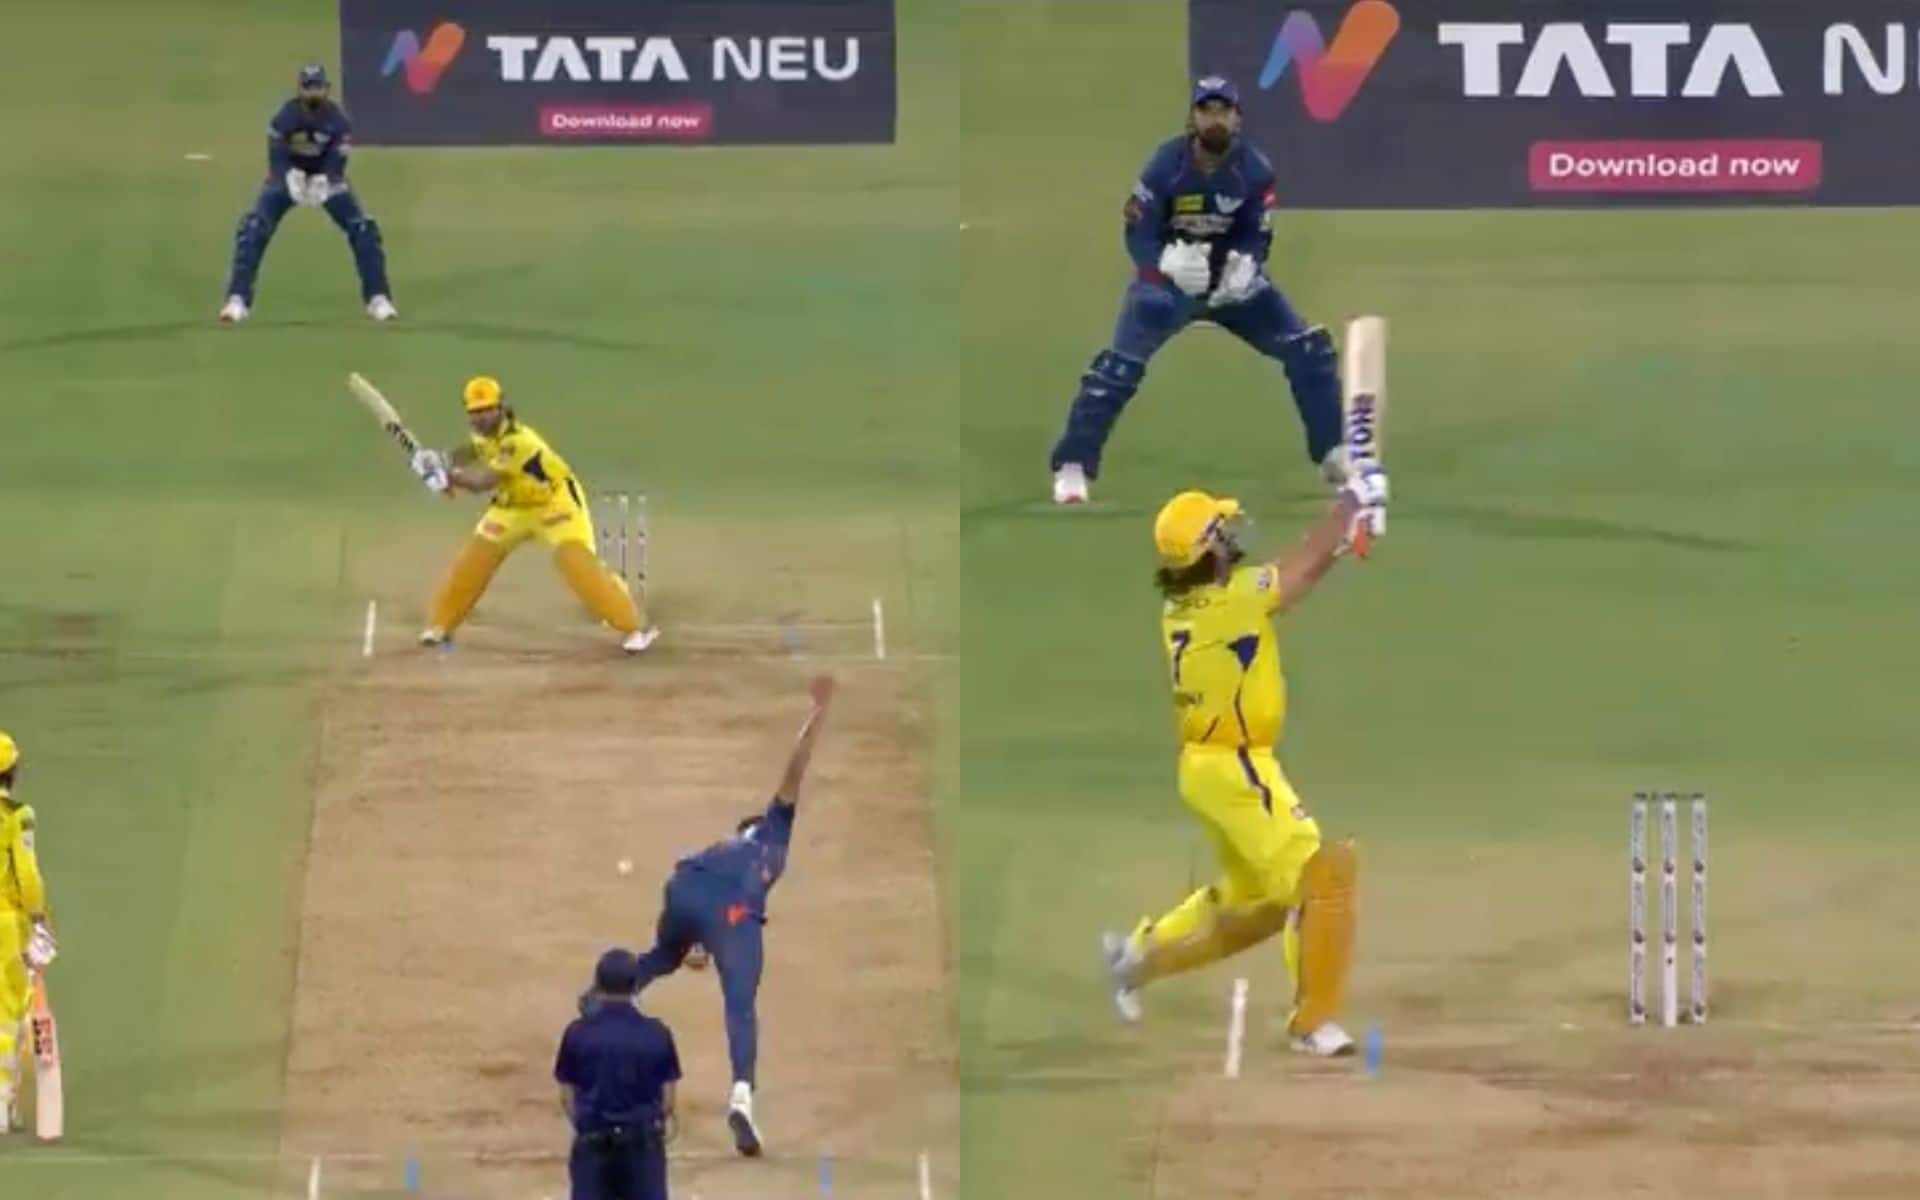 MS Dhoni goes for a ramp shot vs Mohsin (X.com)